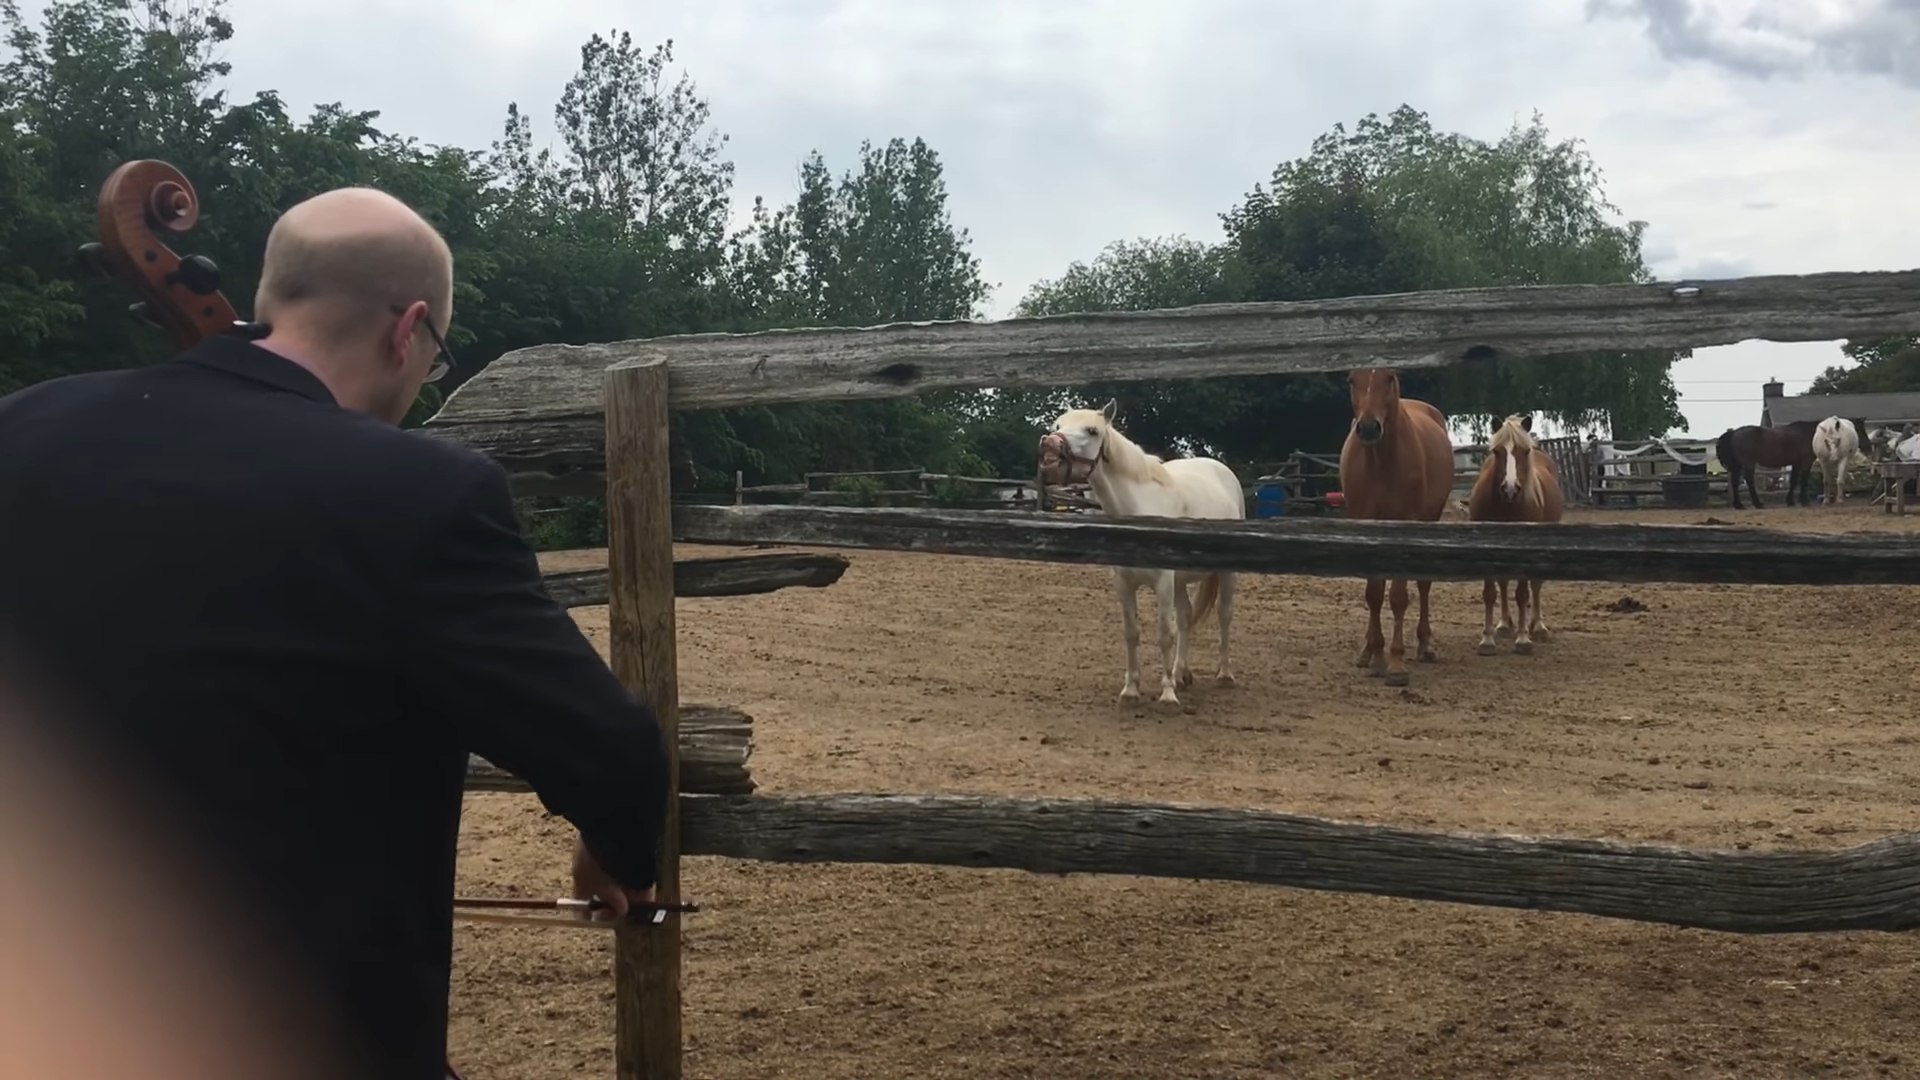 Maп Plays Bach for Horses-Their Adorable Reactioп Goes Viral!